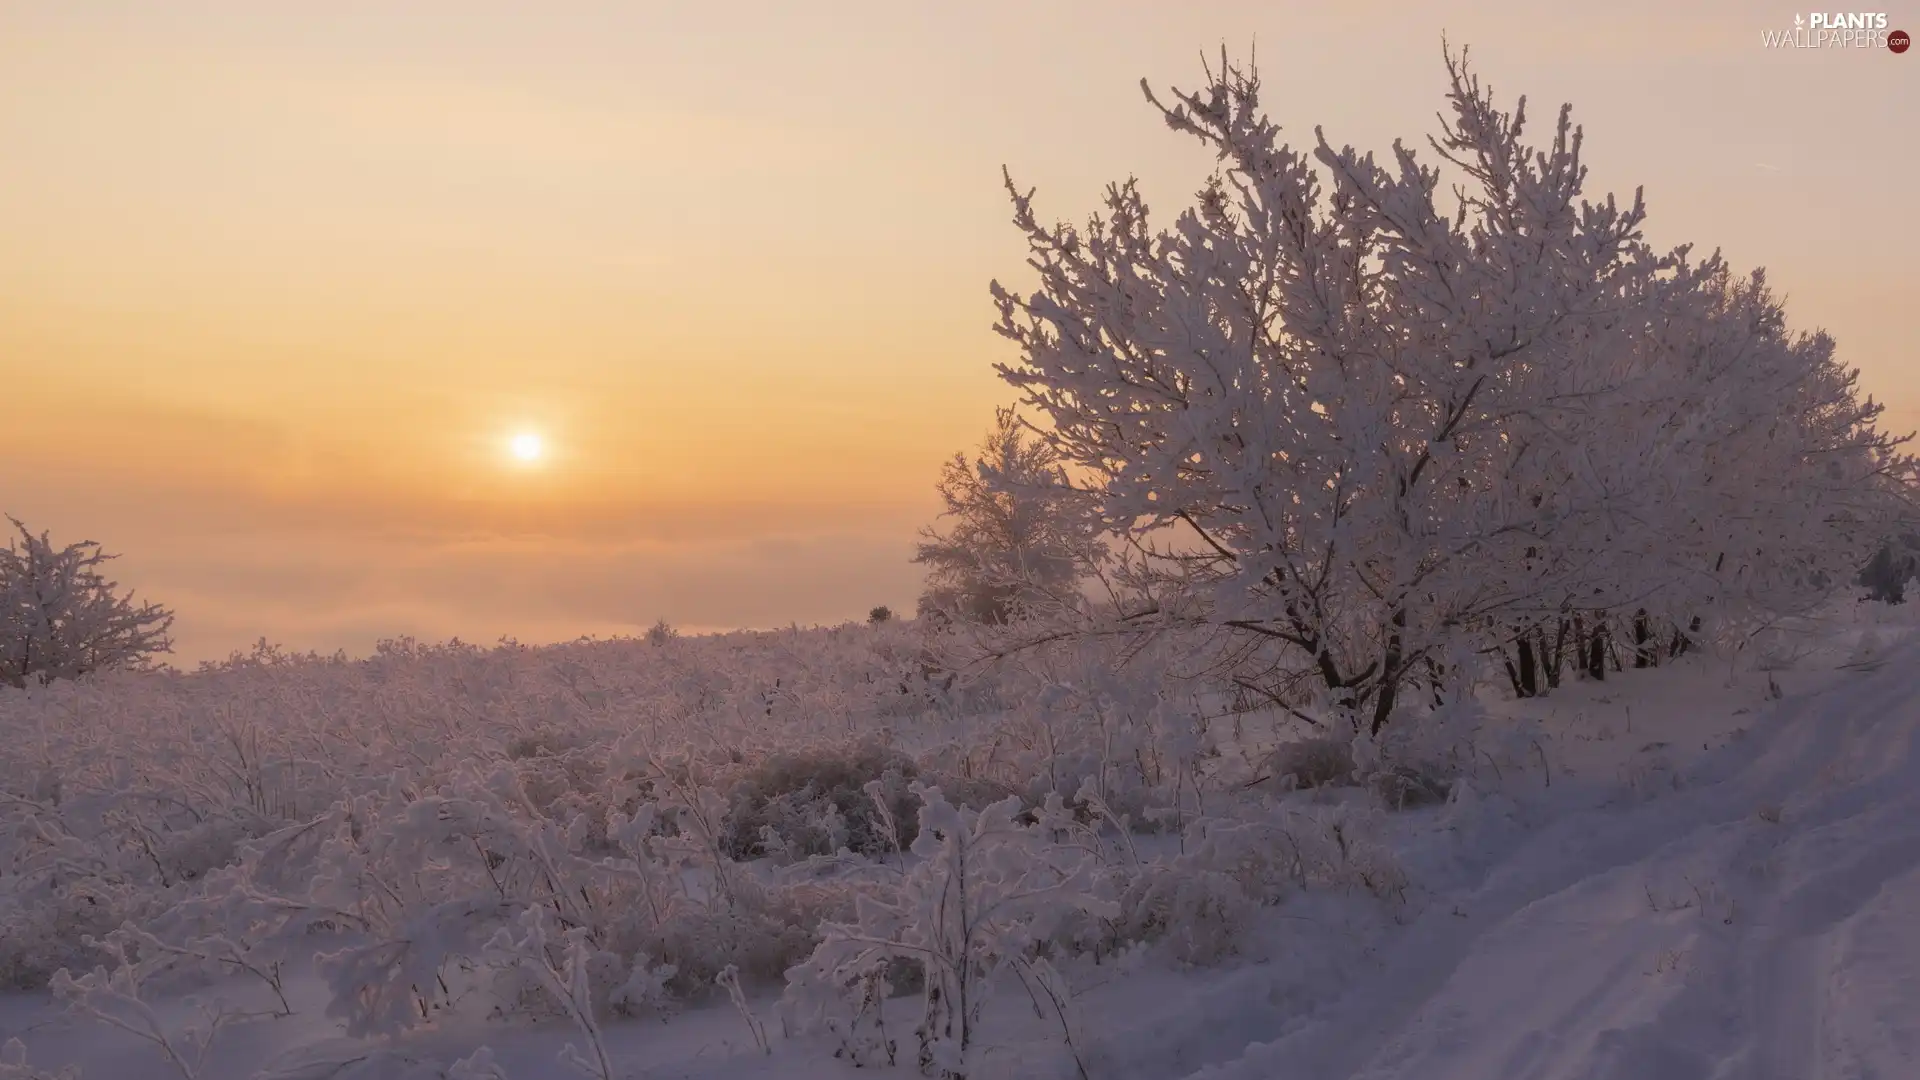 Snowy, Sunrise, viewes, Plants, trees, winter